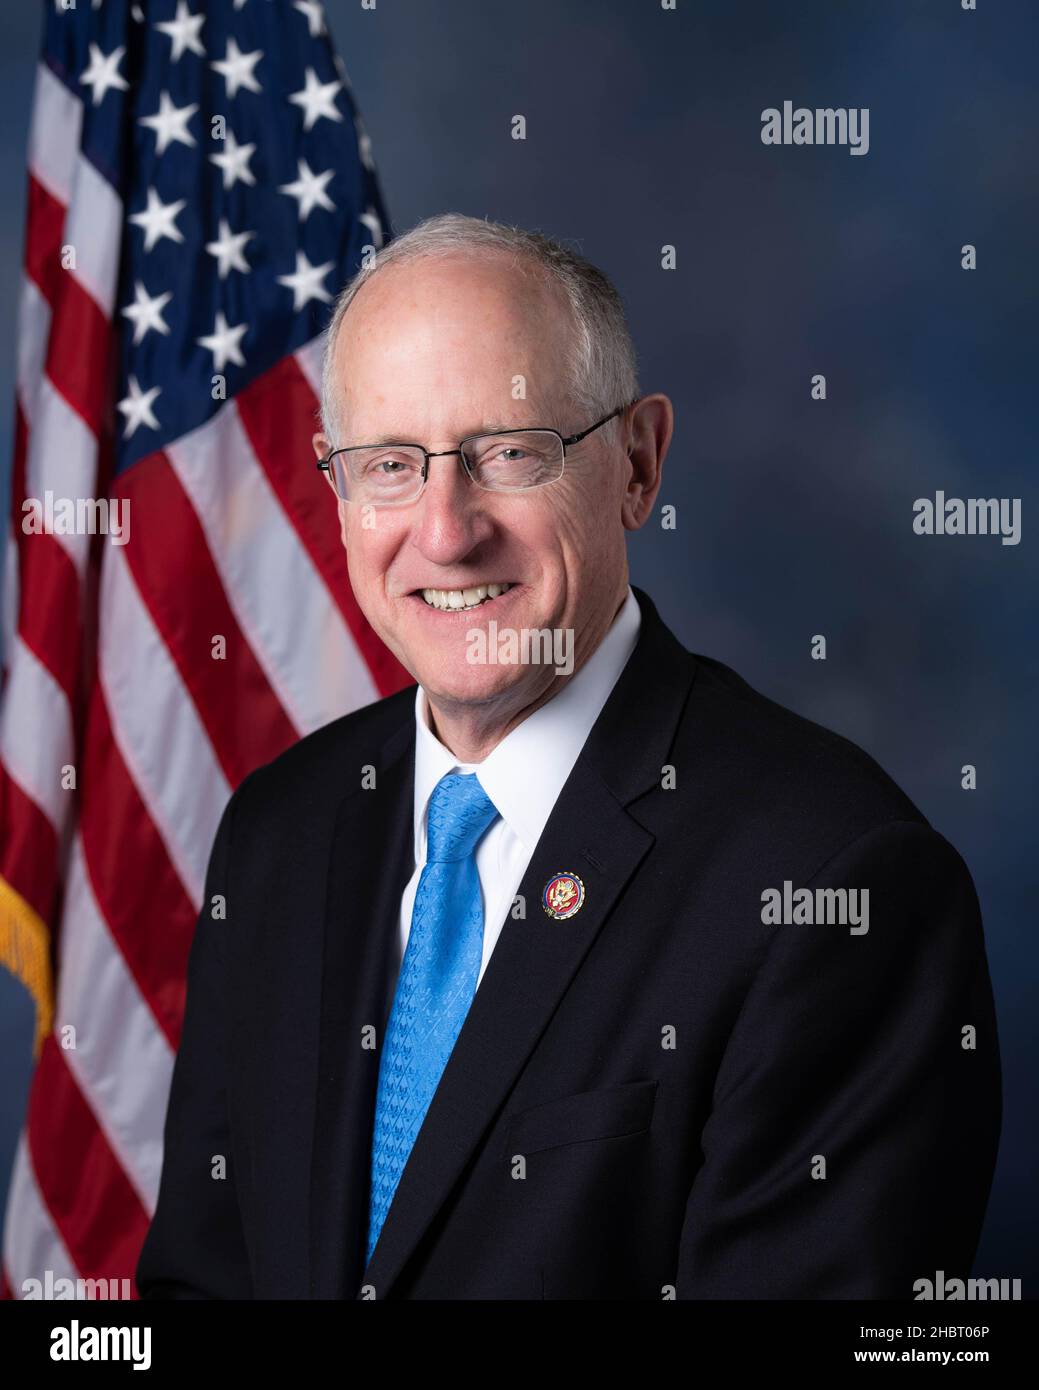 U.S. Rep. Mike Conaway of Texas ca. 10 March 2020 Stock Photo